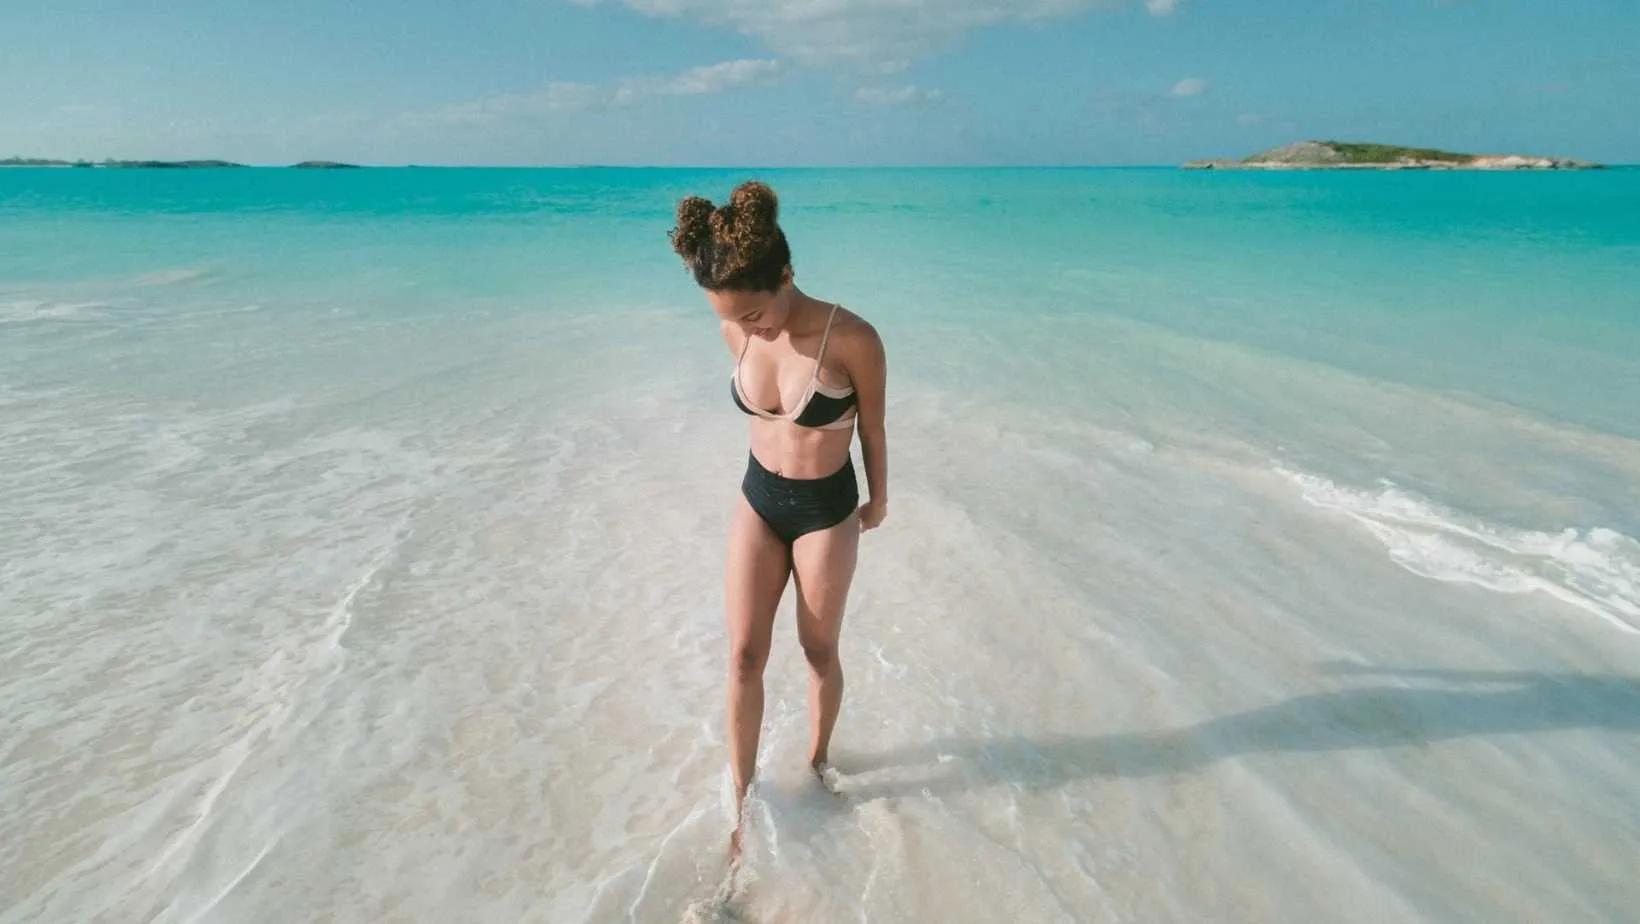 Can You Swim In The Bahamas?